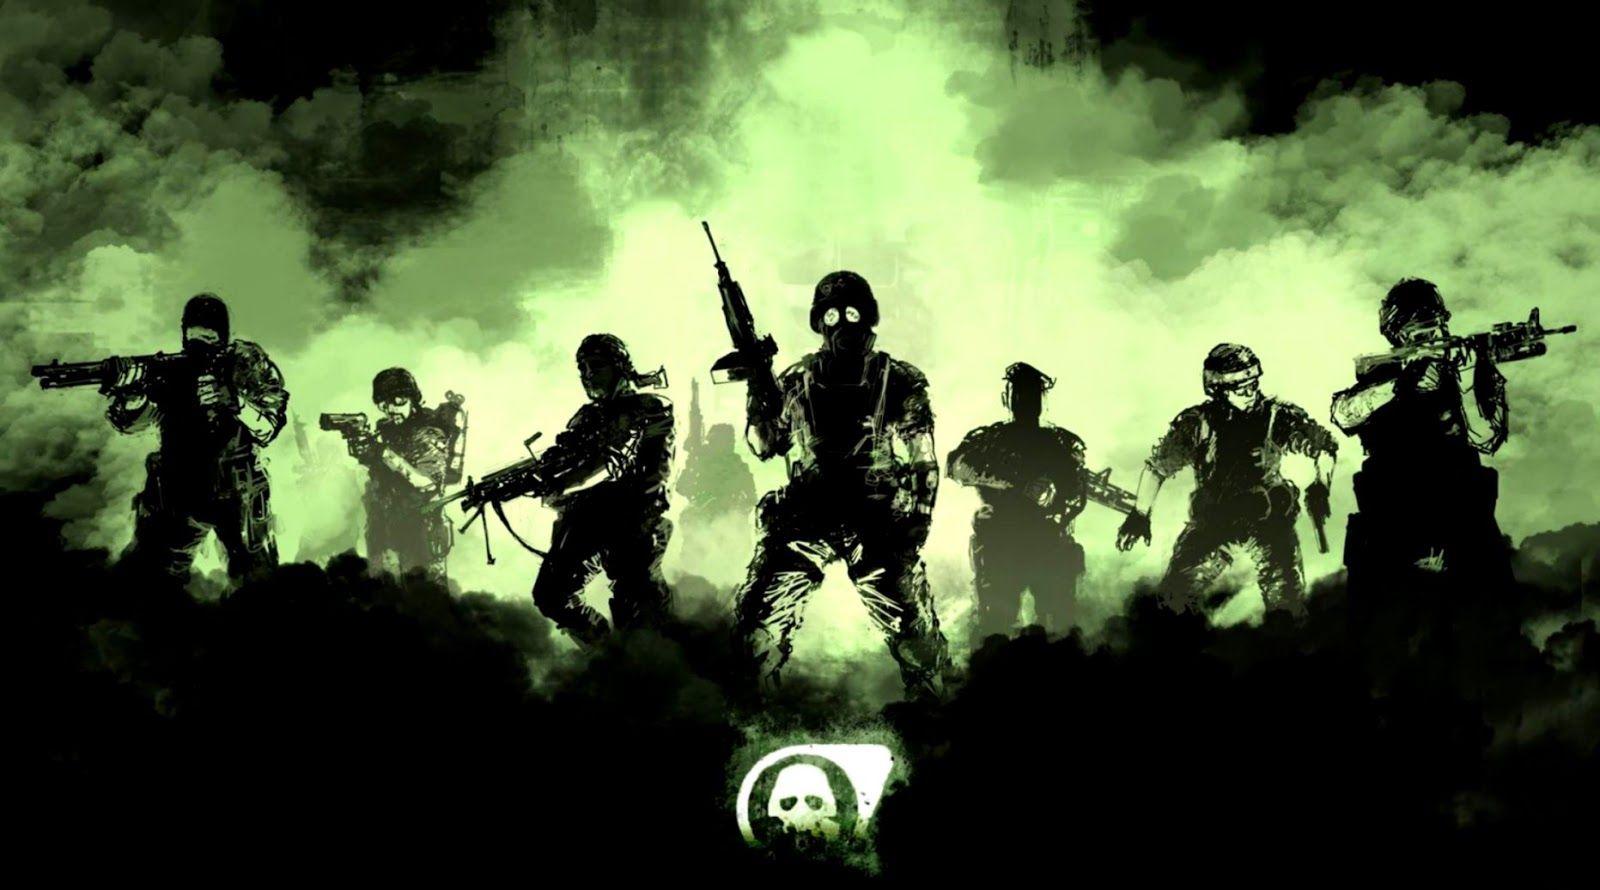 Cool Gaming Wallpaper 2048 by 1152. Army wallpaper, Military